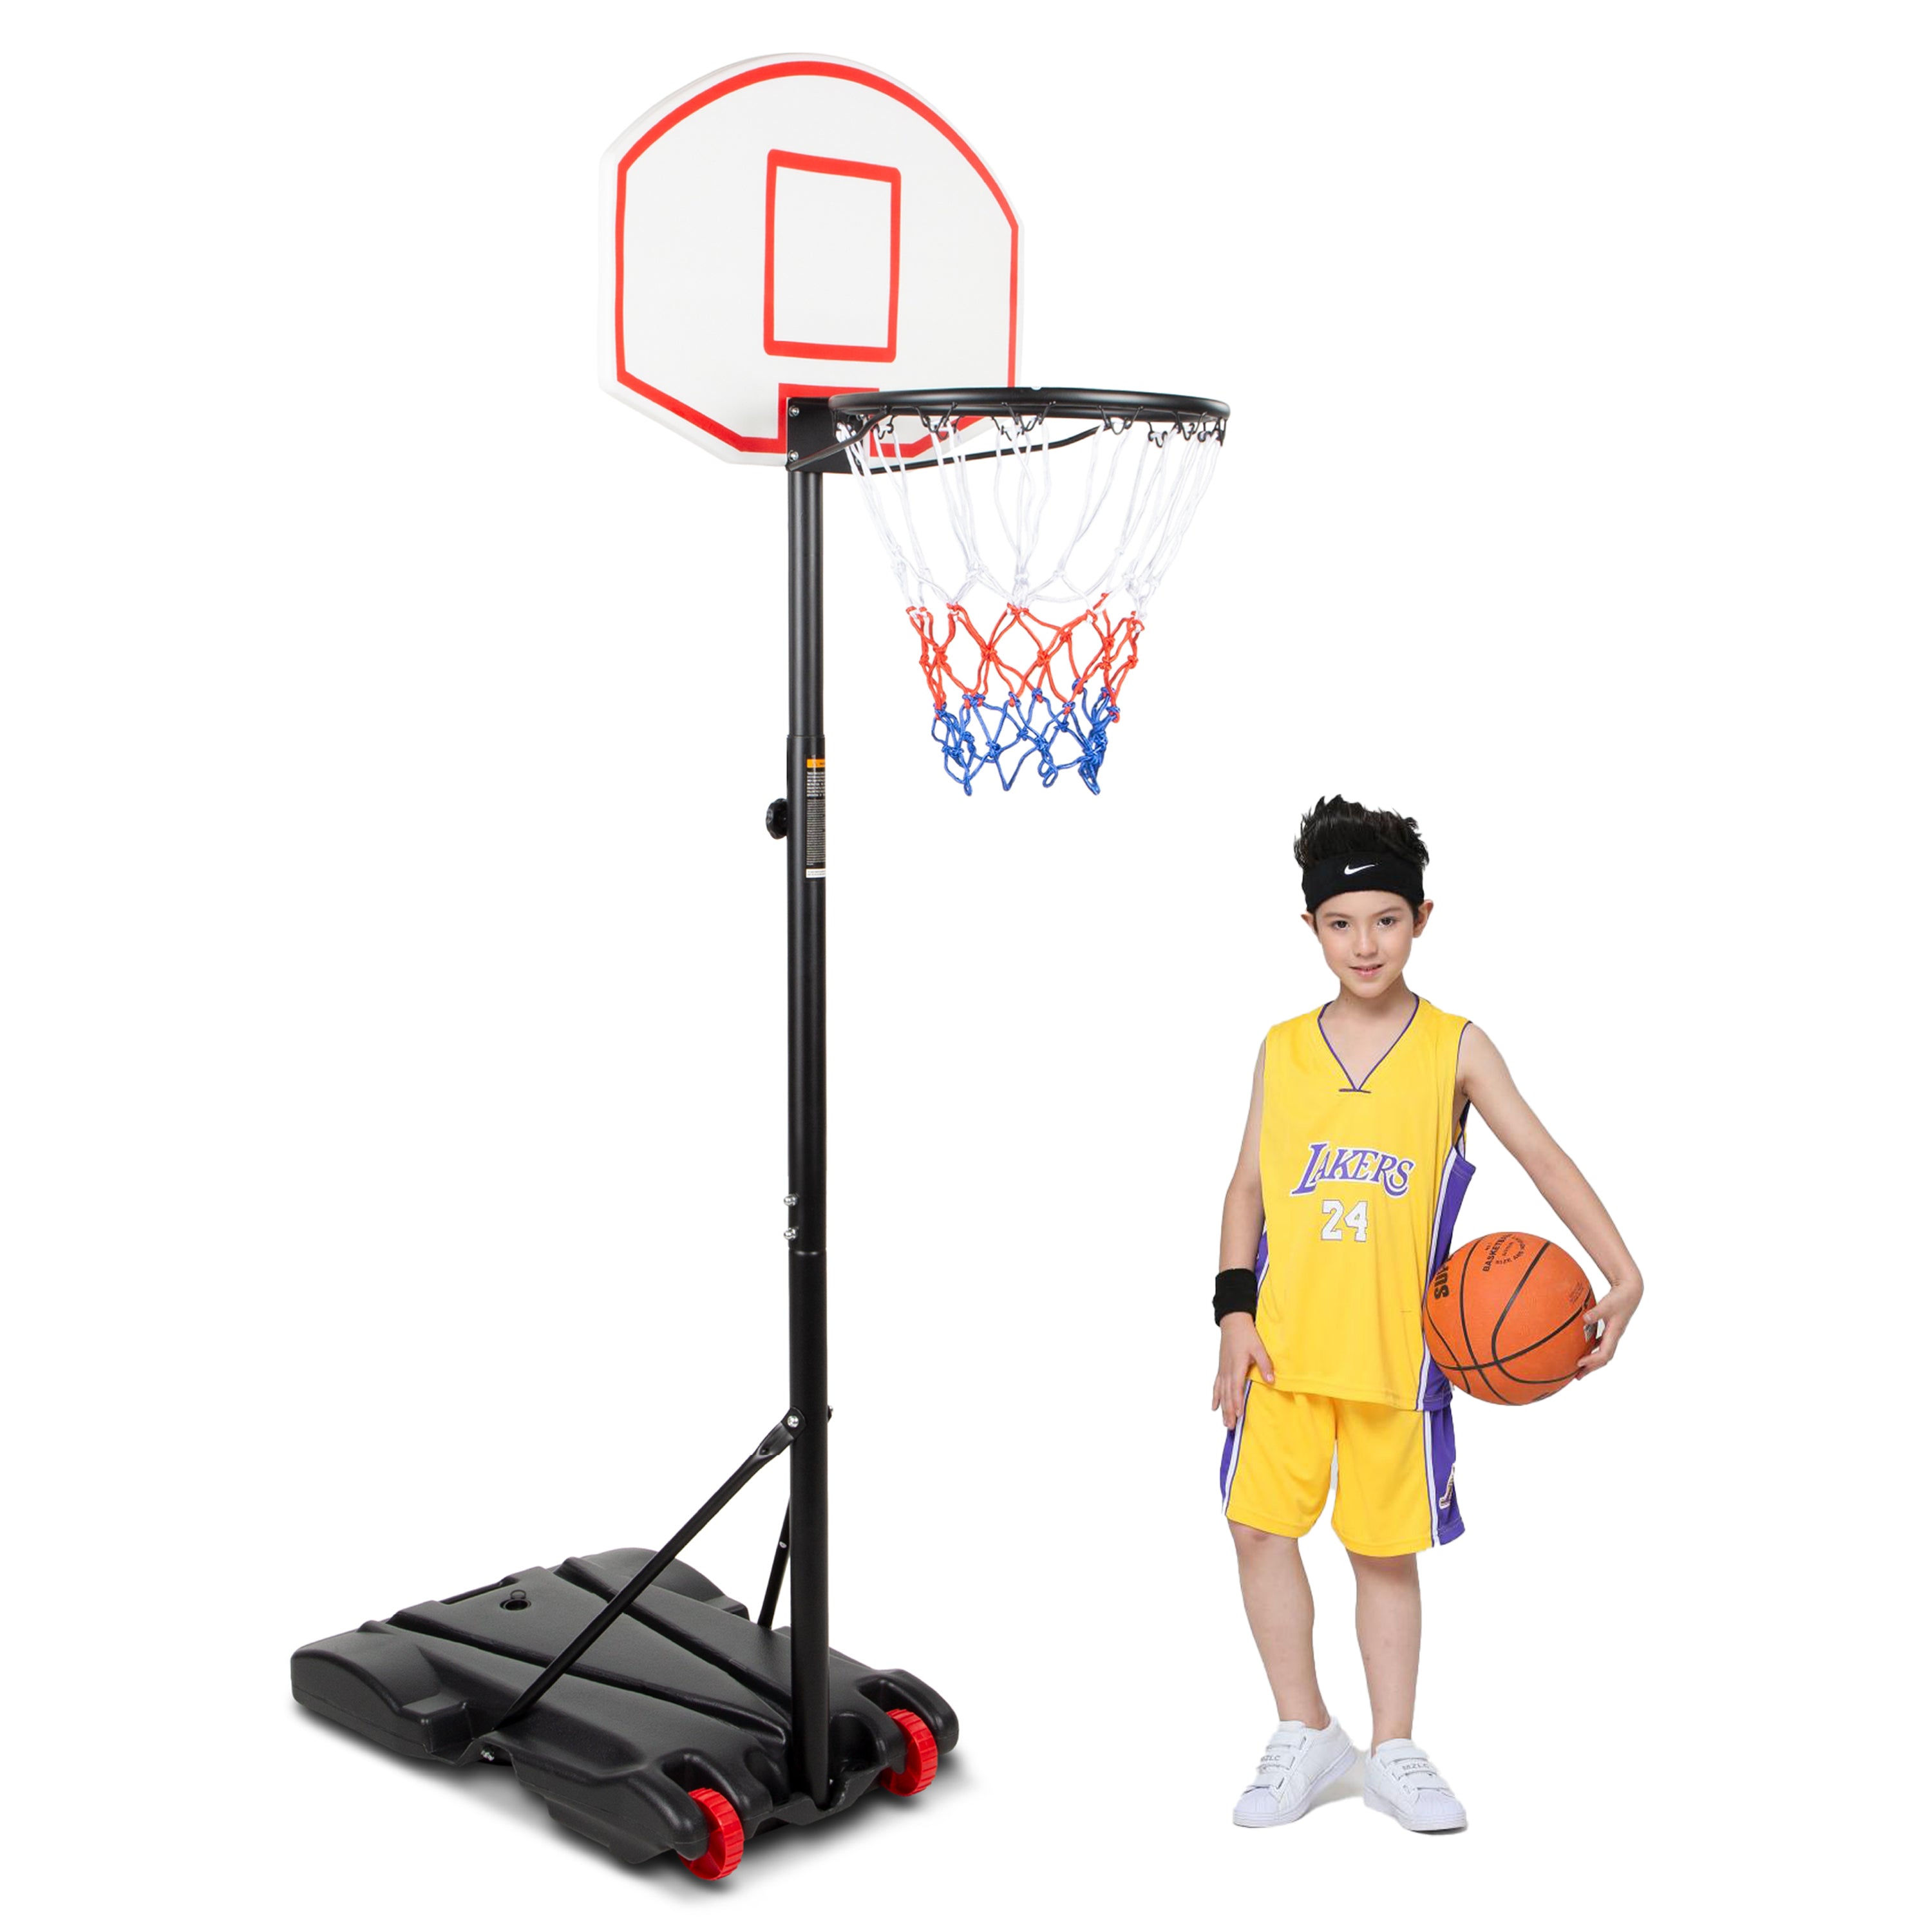 SKONYON Kids Portable Height-Adjustable Sports Basketball Hoop Backboard System Stand with Wheels - Black